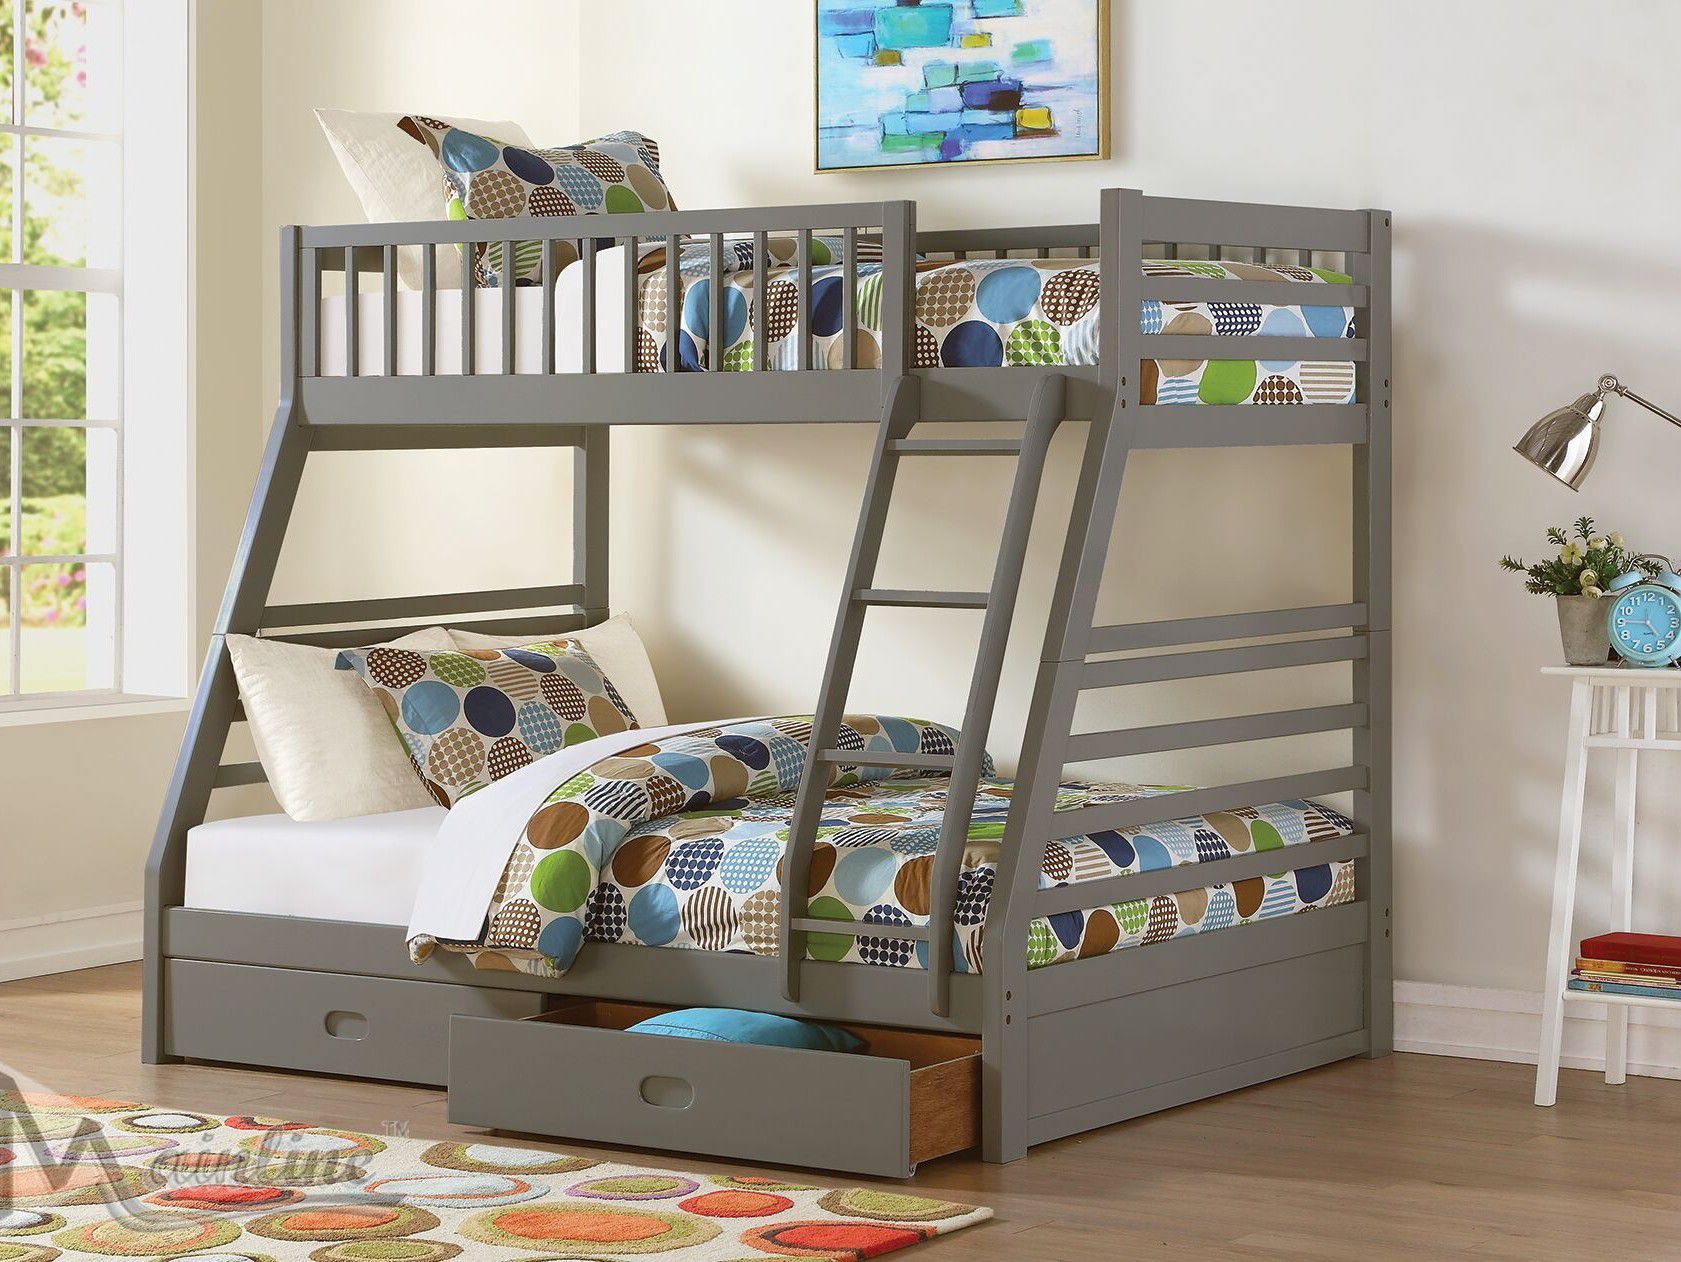 New! Gray Twin/Full Storage Bunkbed + FREE DELIVERY!